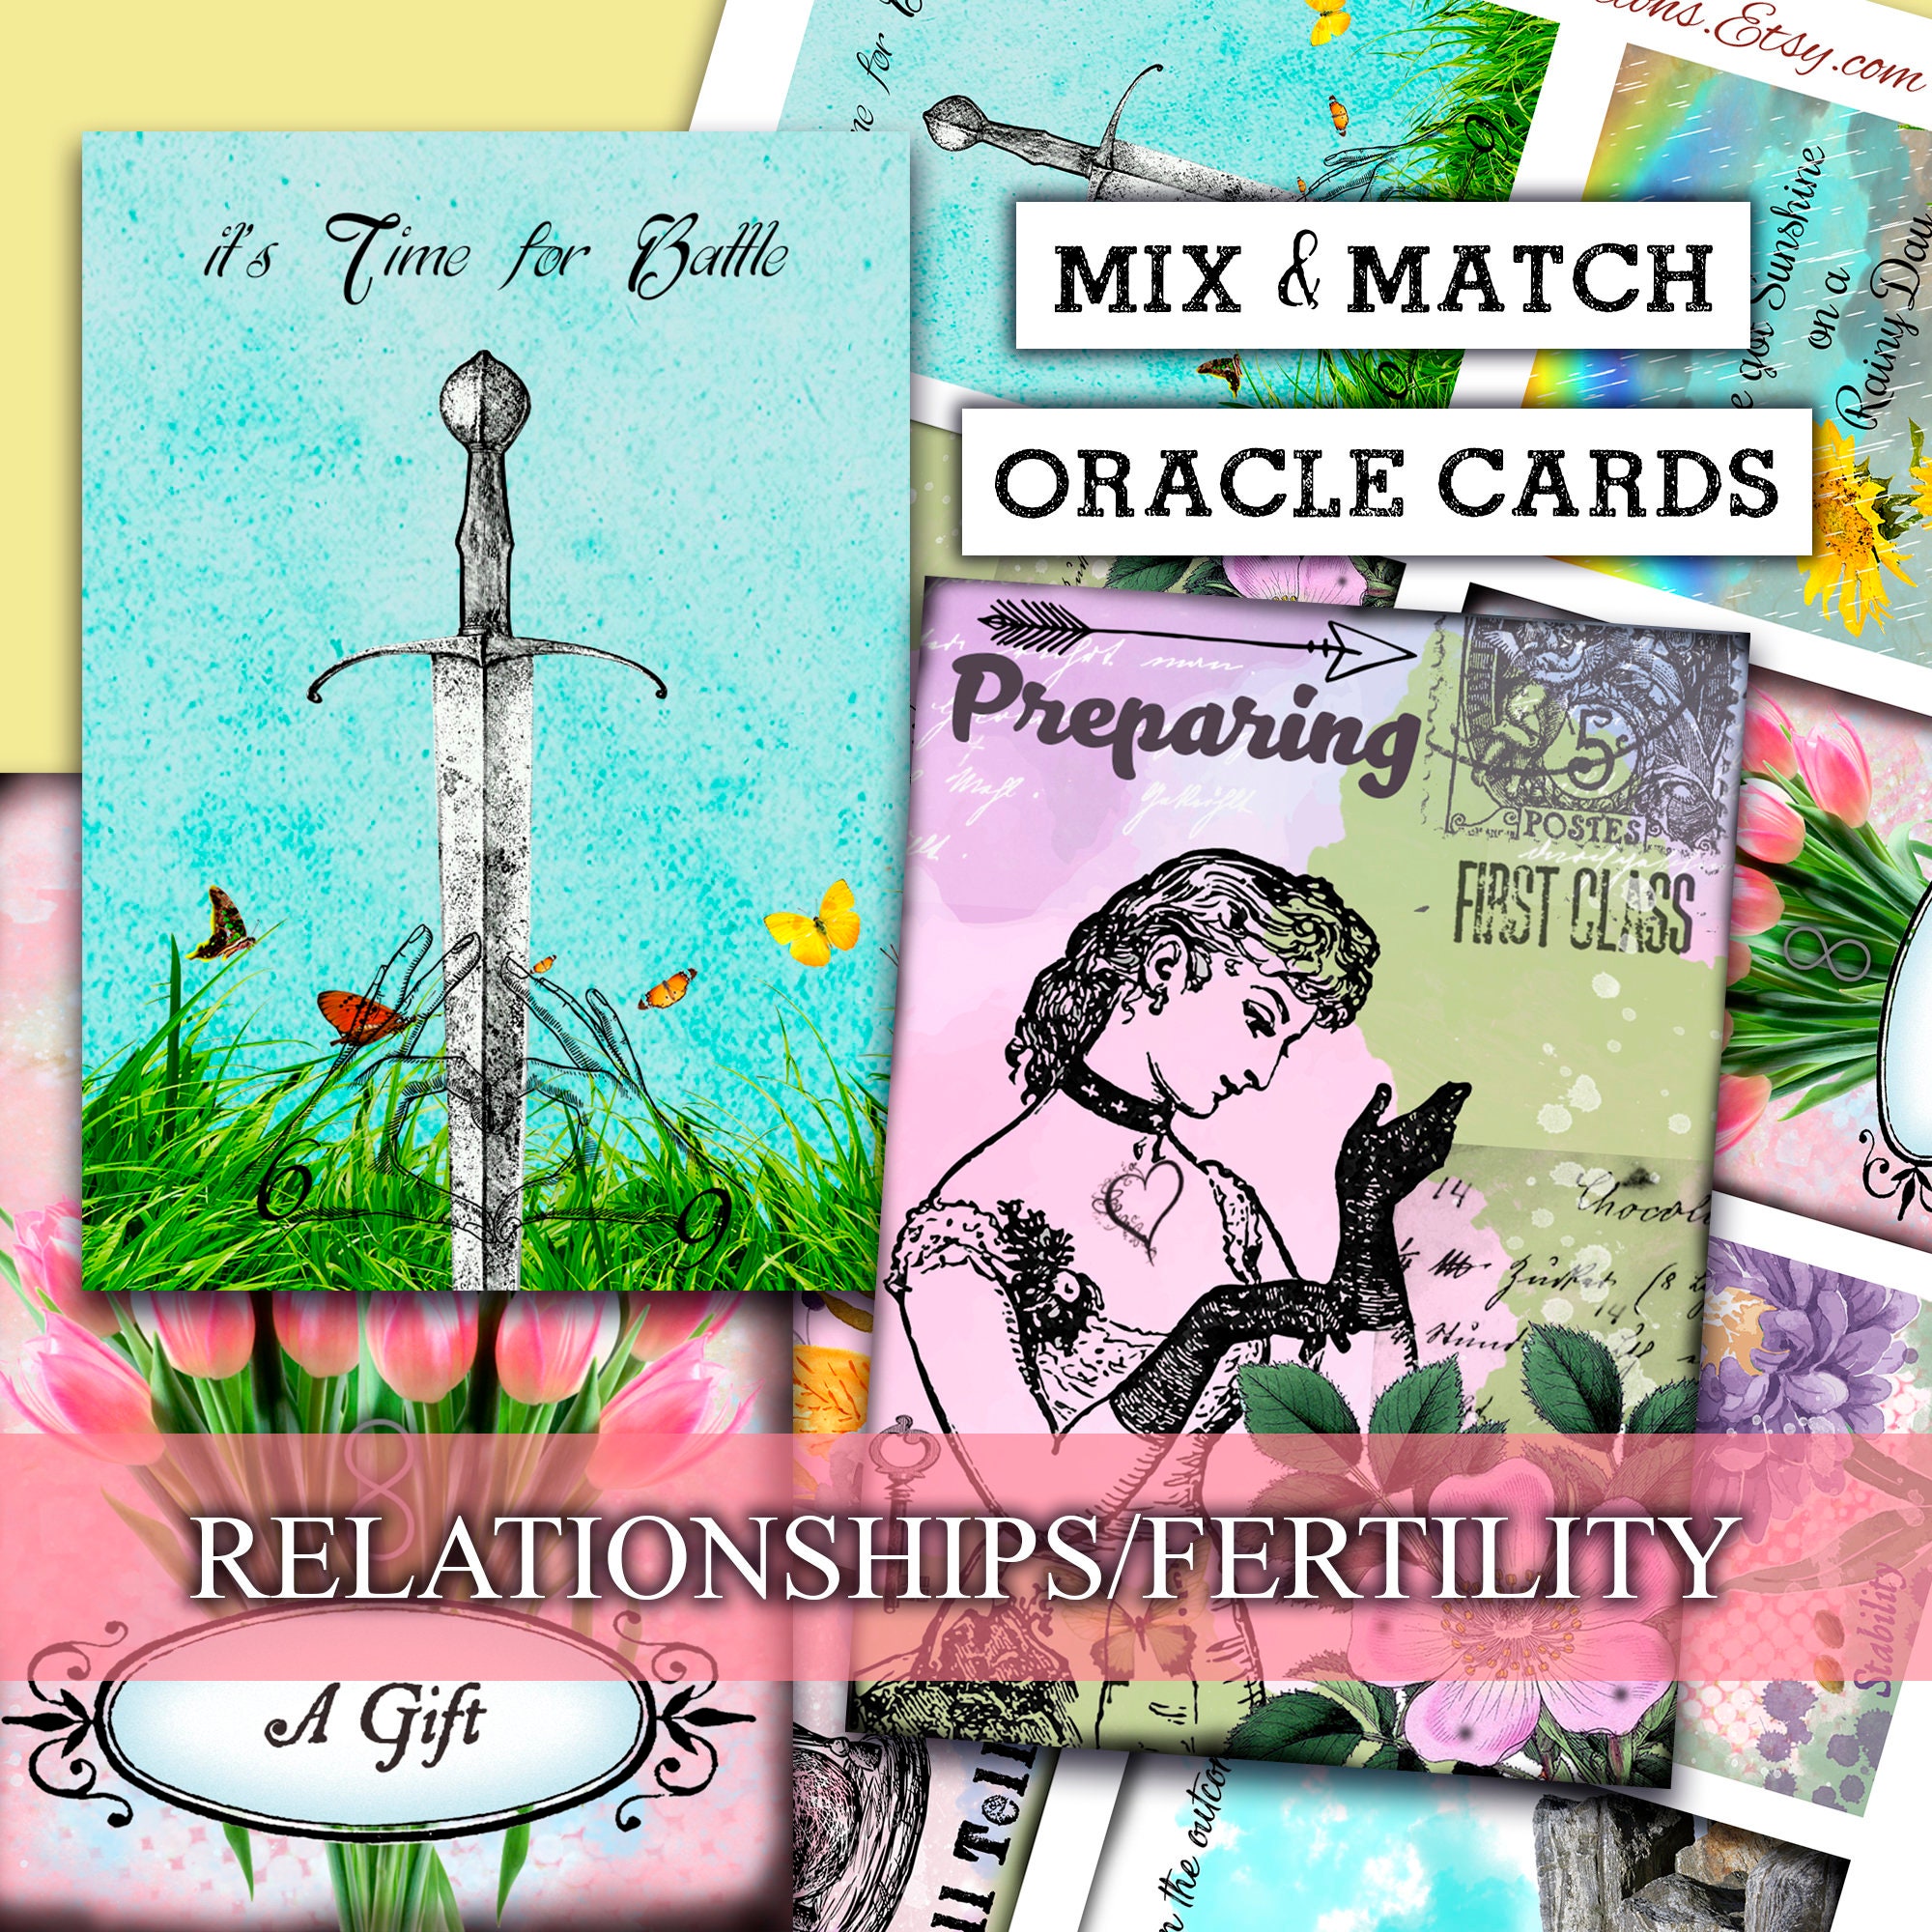 printable-oracle-cards-relationships-fertility-romance-etsy